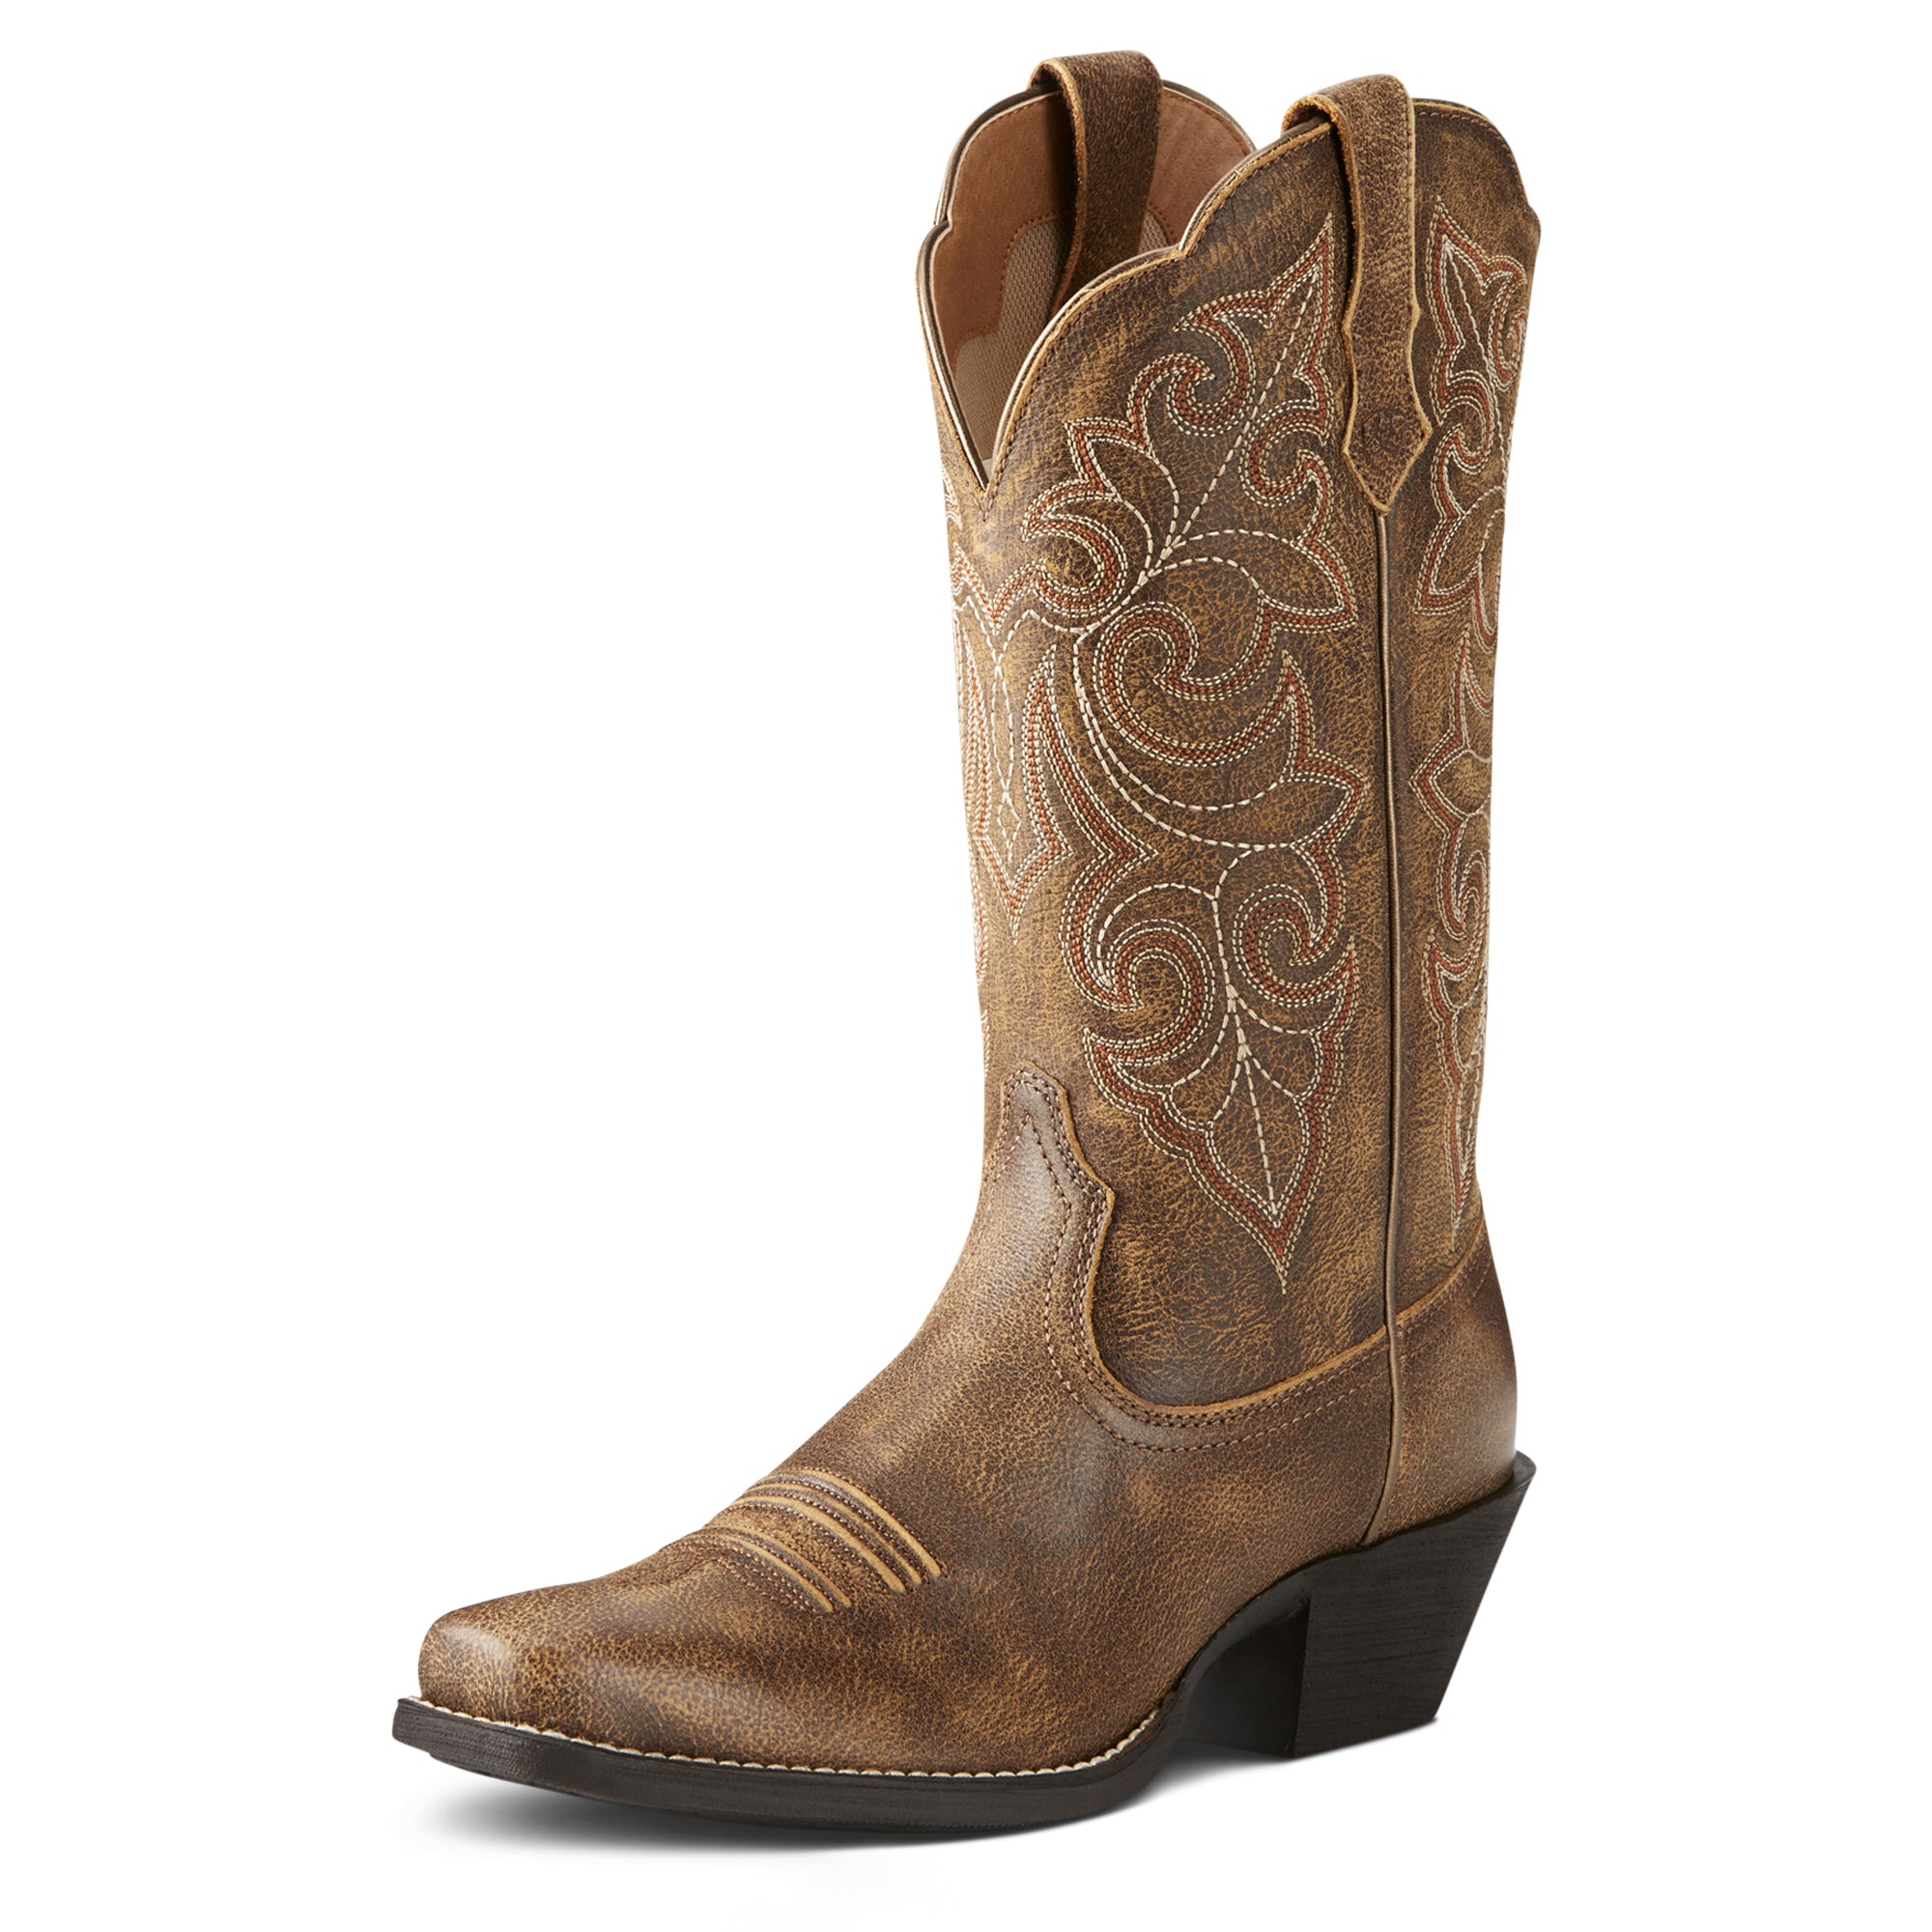 Women's Heritage R Toe Western Boots in Distressed Brown, B Medium Width,  Regular Calf, Size 36.5, by Ariat